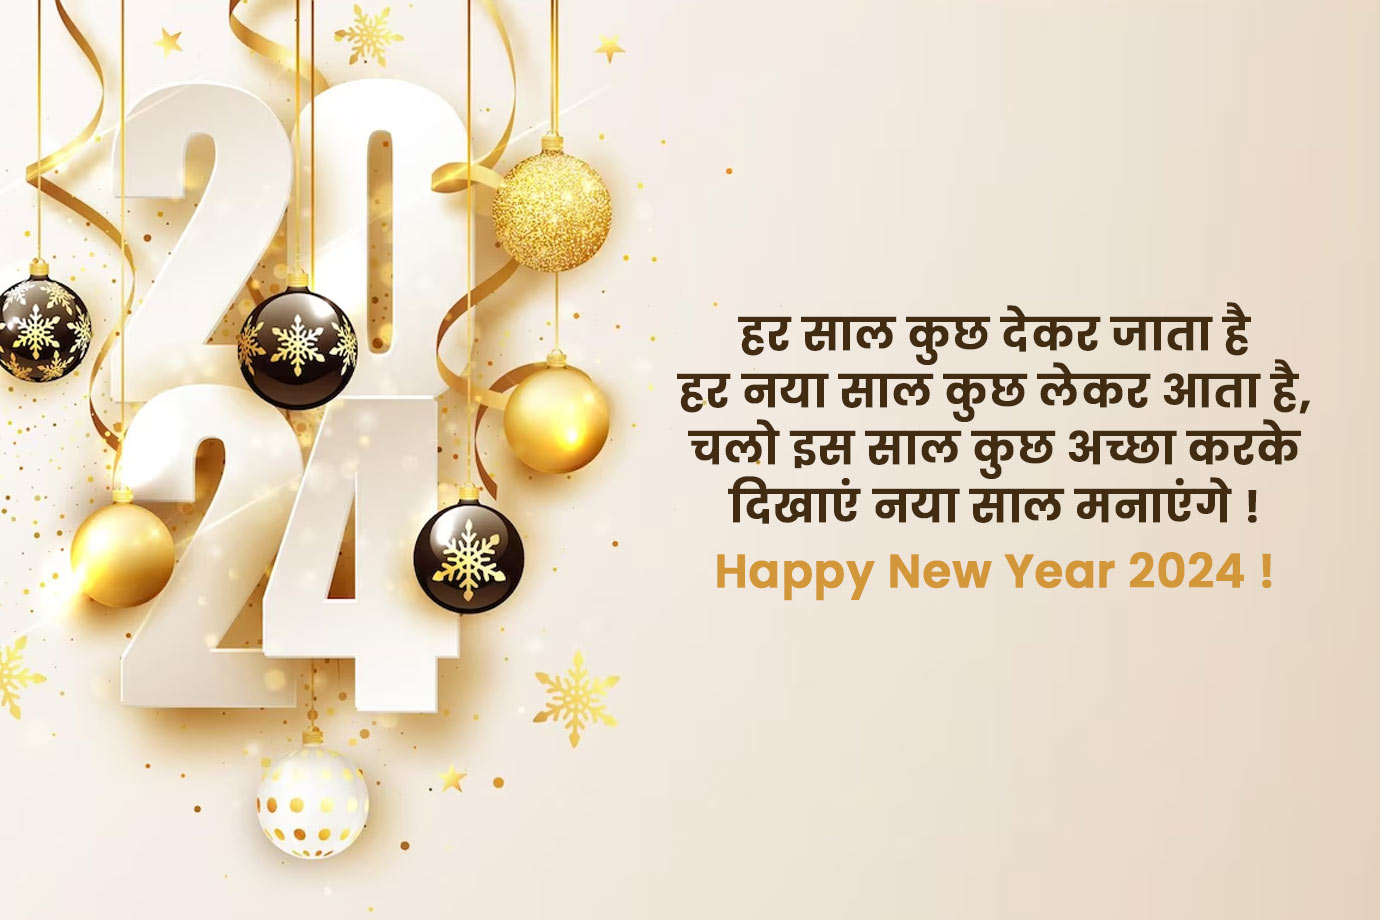 Happy New Year Wishes, Quotes & Message in Hindi हैप्पी न्यू ईयर विशेज